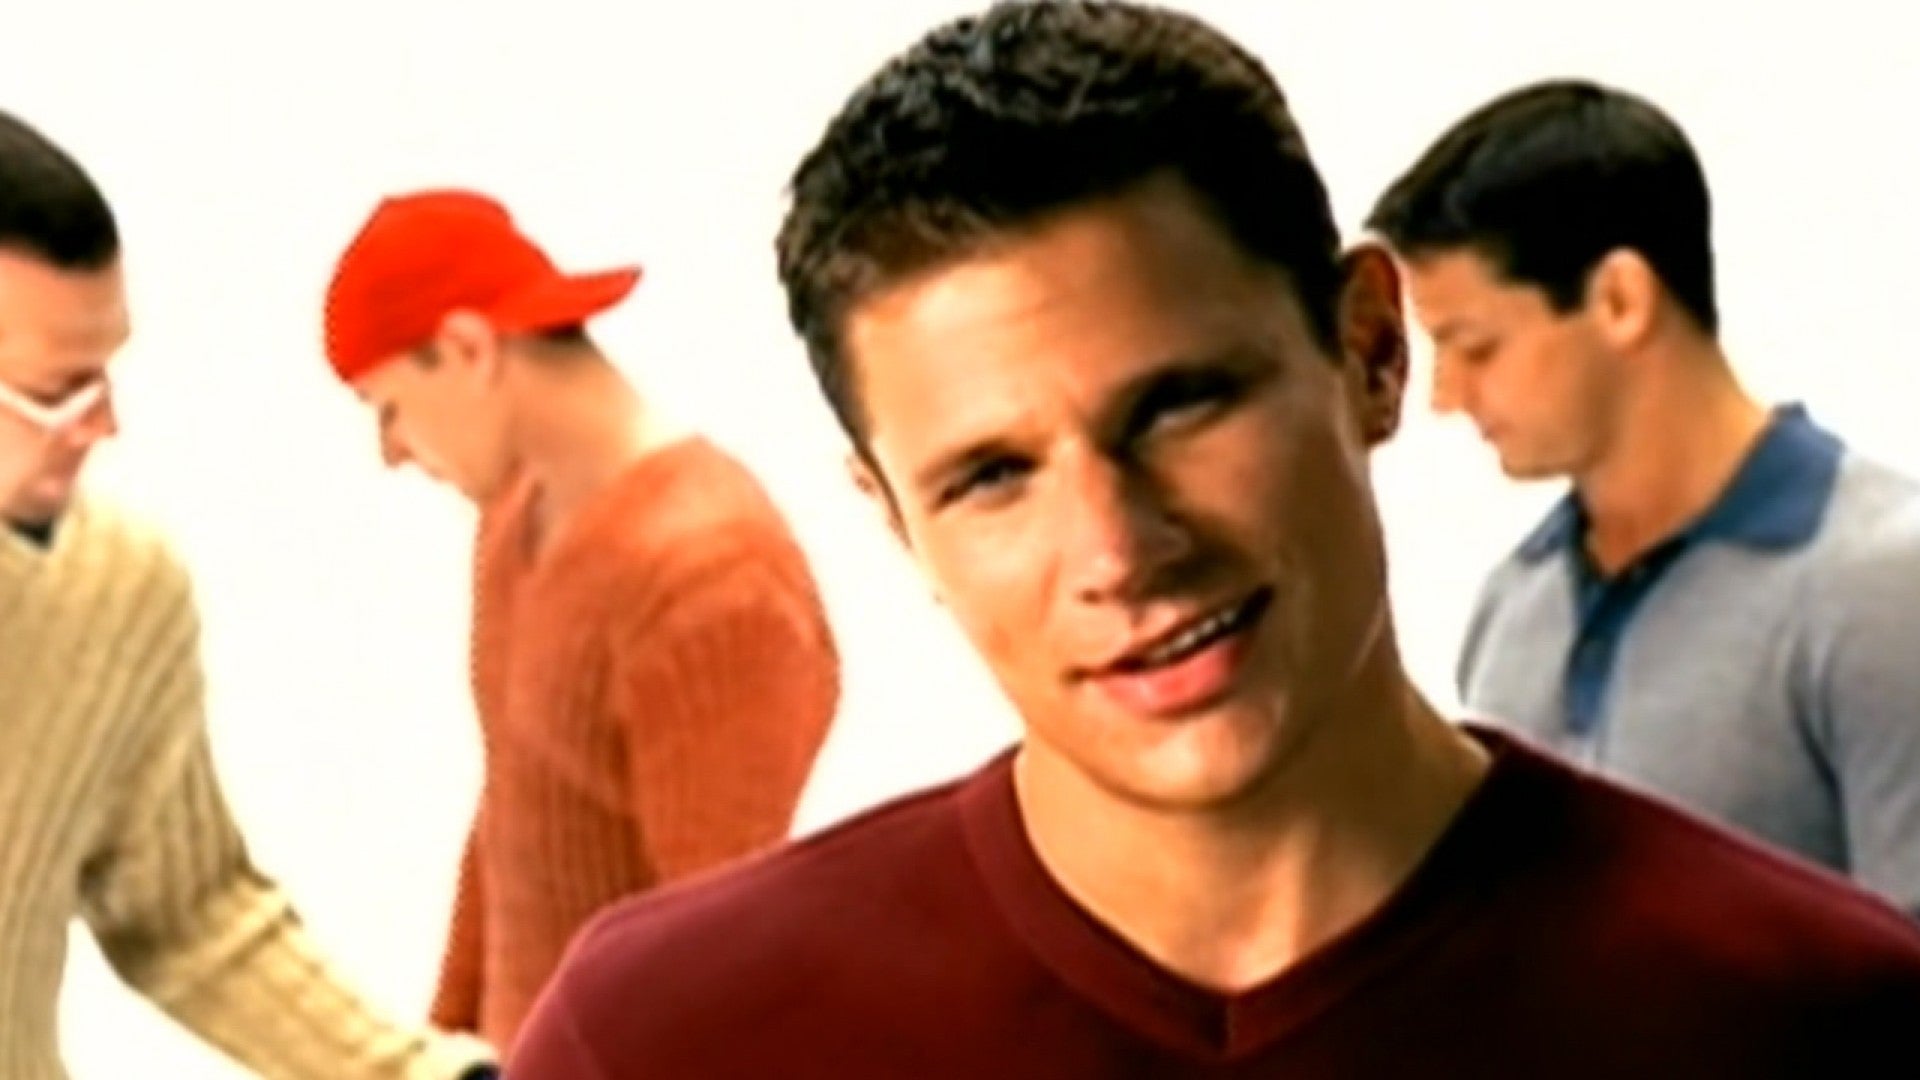 EXCLUSIVE: Nick Lachey and 98 Degrees 